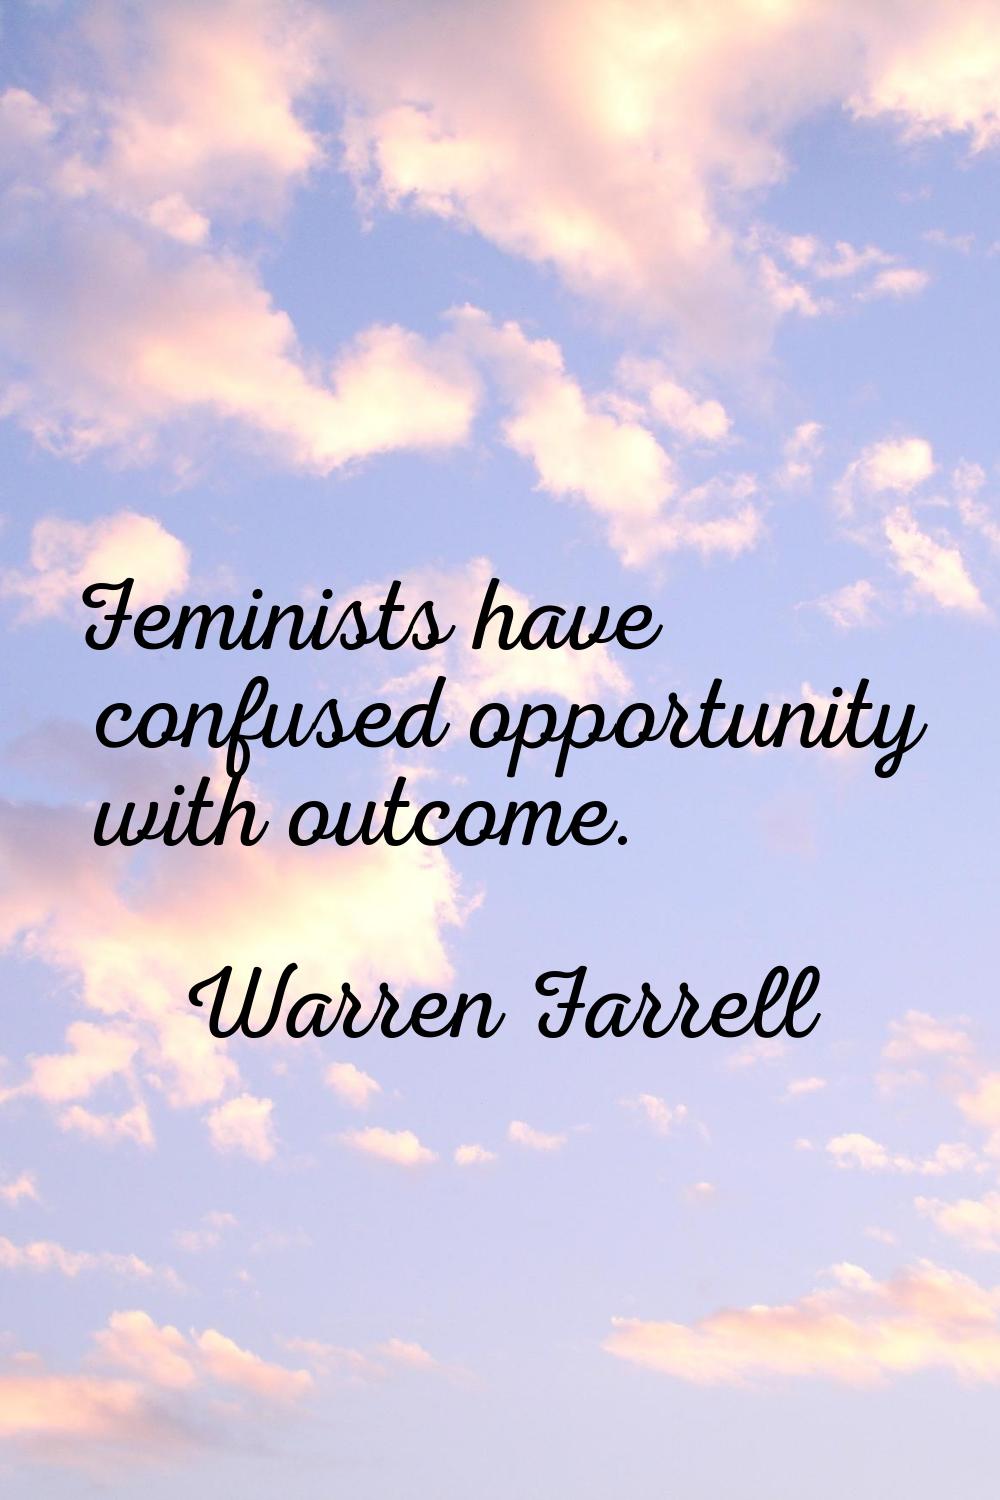 Feminists have confused opportunity with outcome.